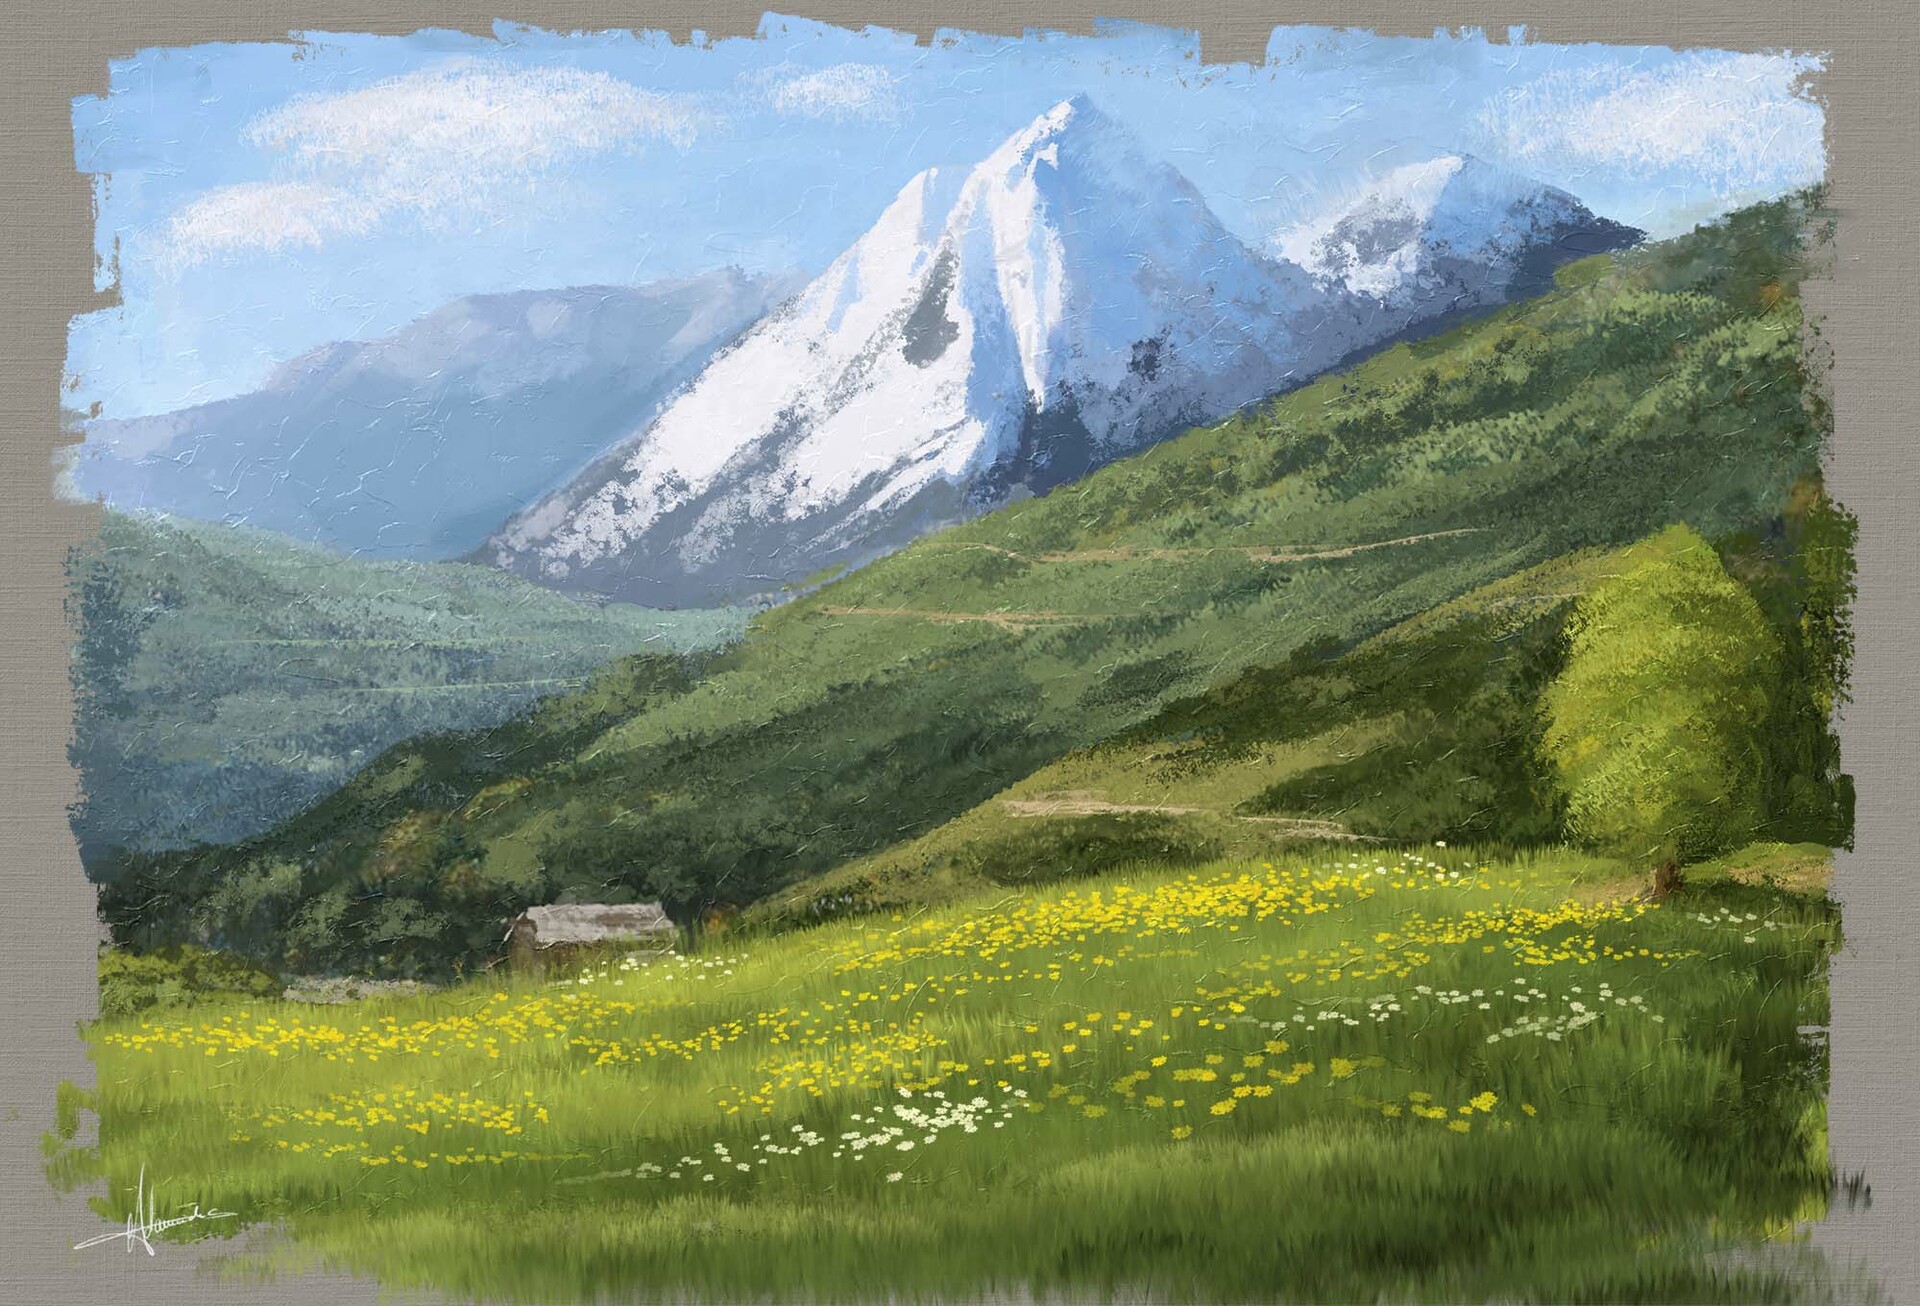 ArtStation - Digital Landscape Oil Painting of Mountains and